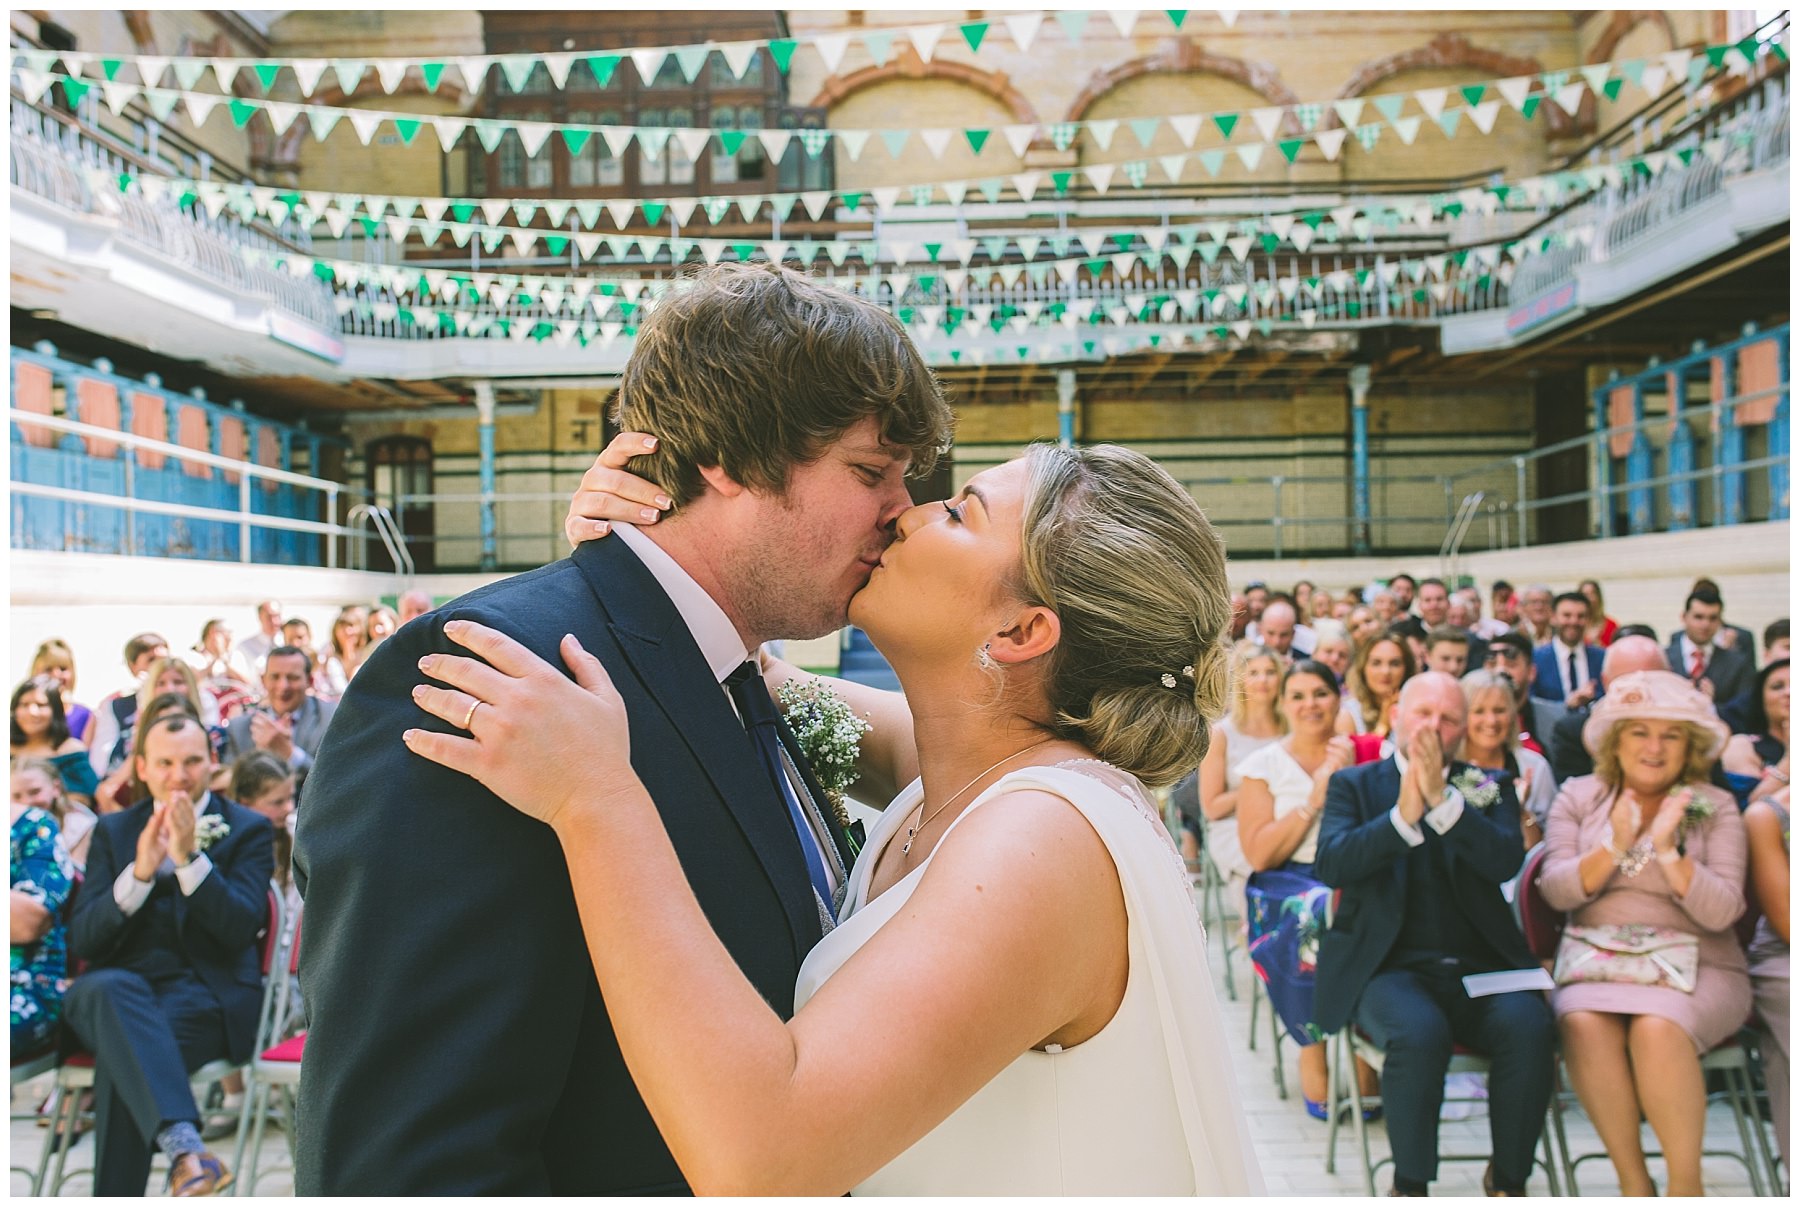 First kiss under the bunting in the pool at Victoria Baths